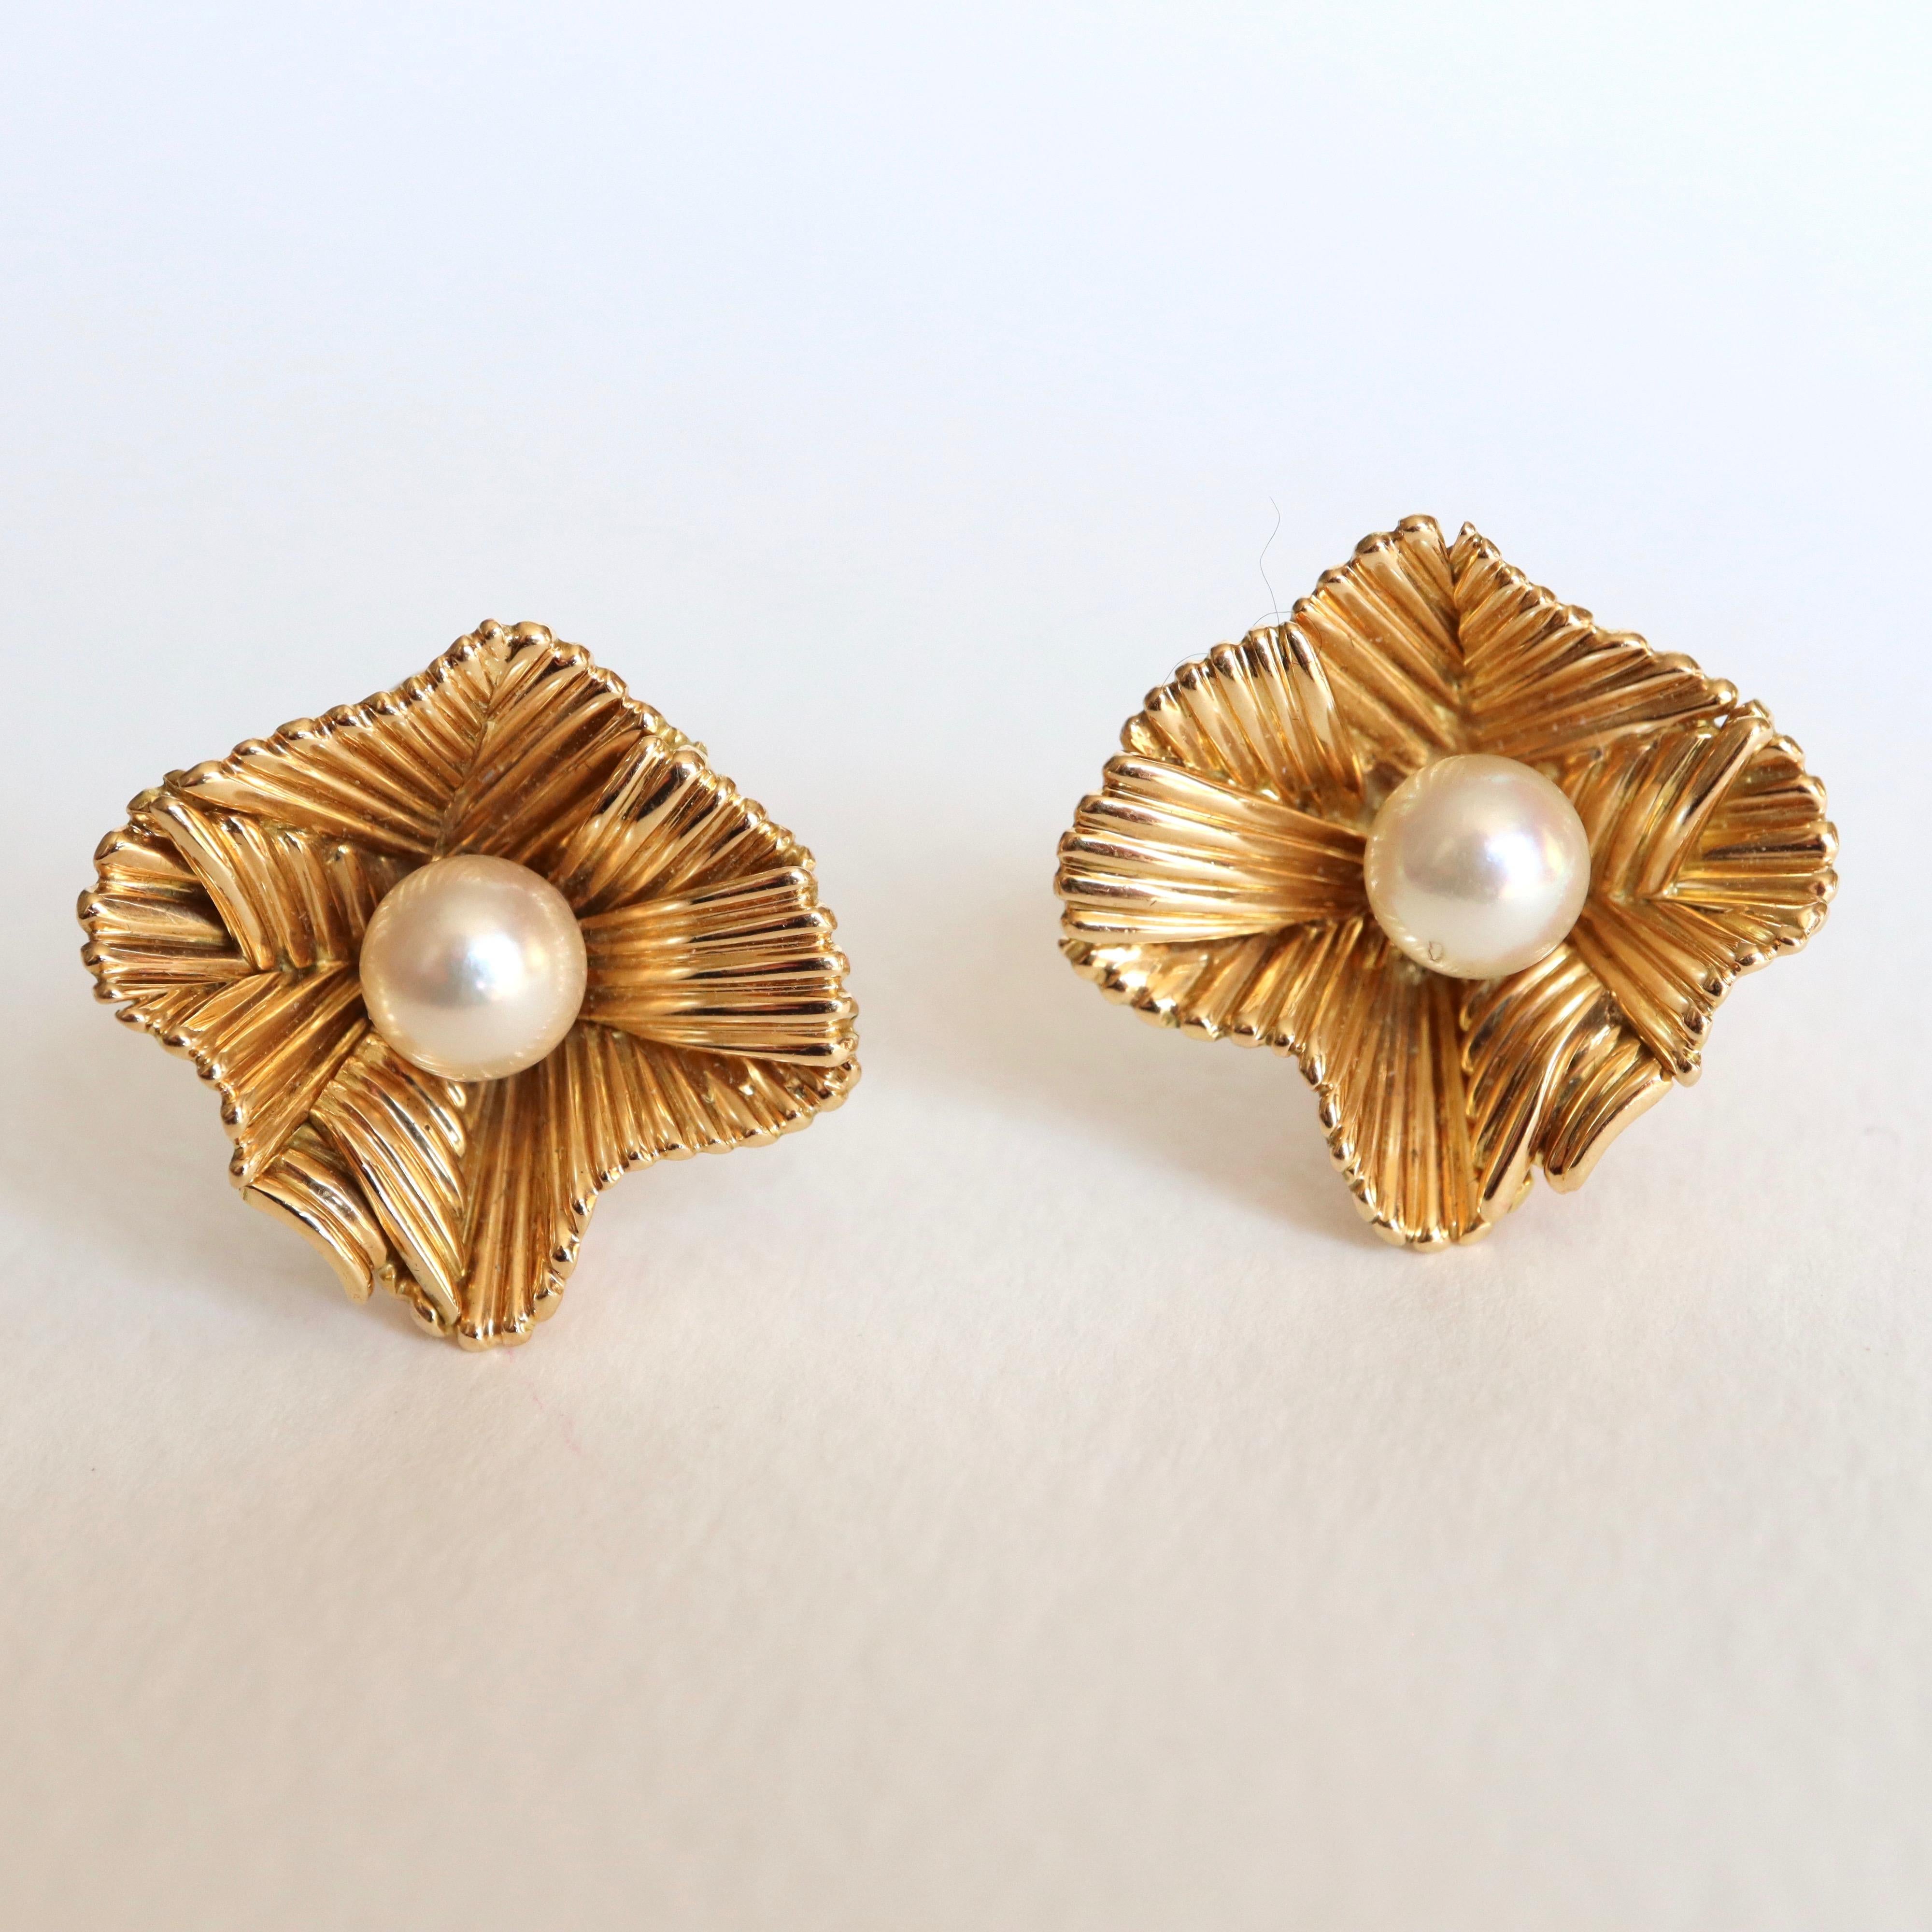 Boucheron Clip Earrings circa 1960 Petals in 18 Carat Gold and Pearl For Sale 5